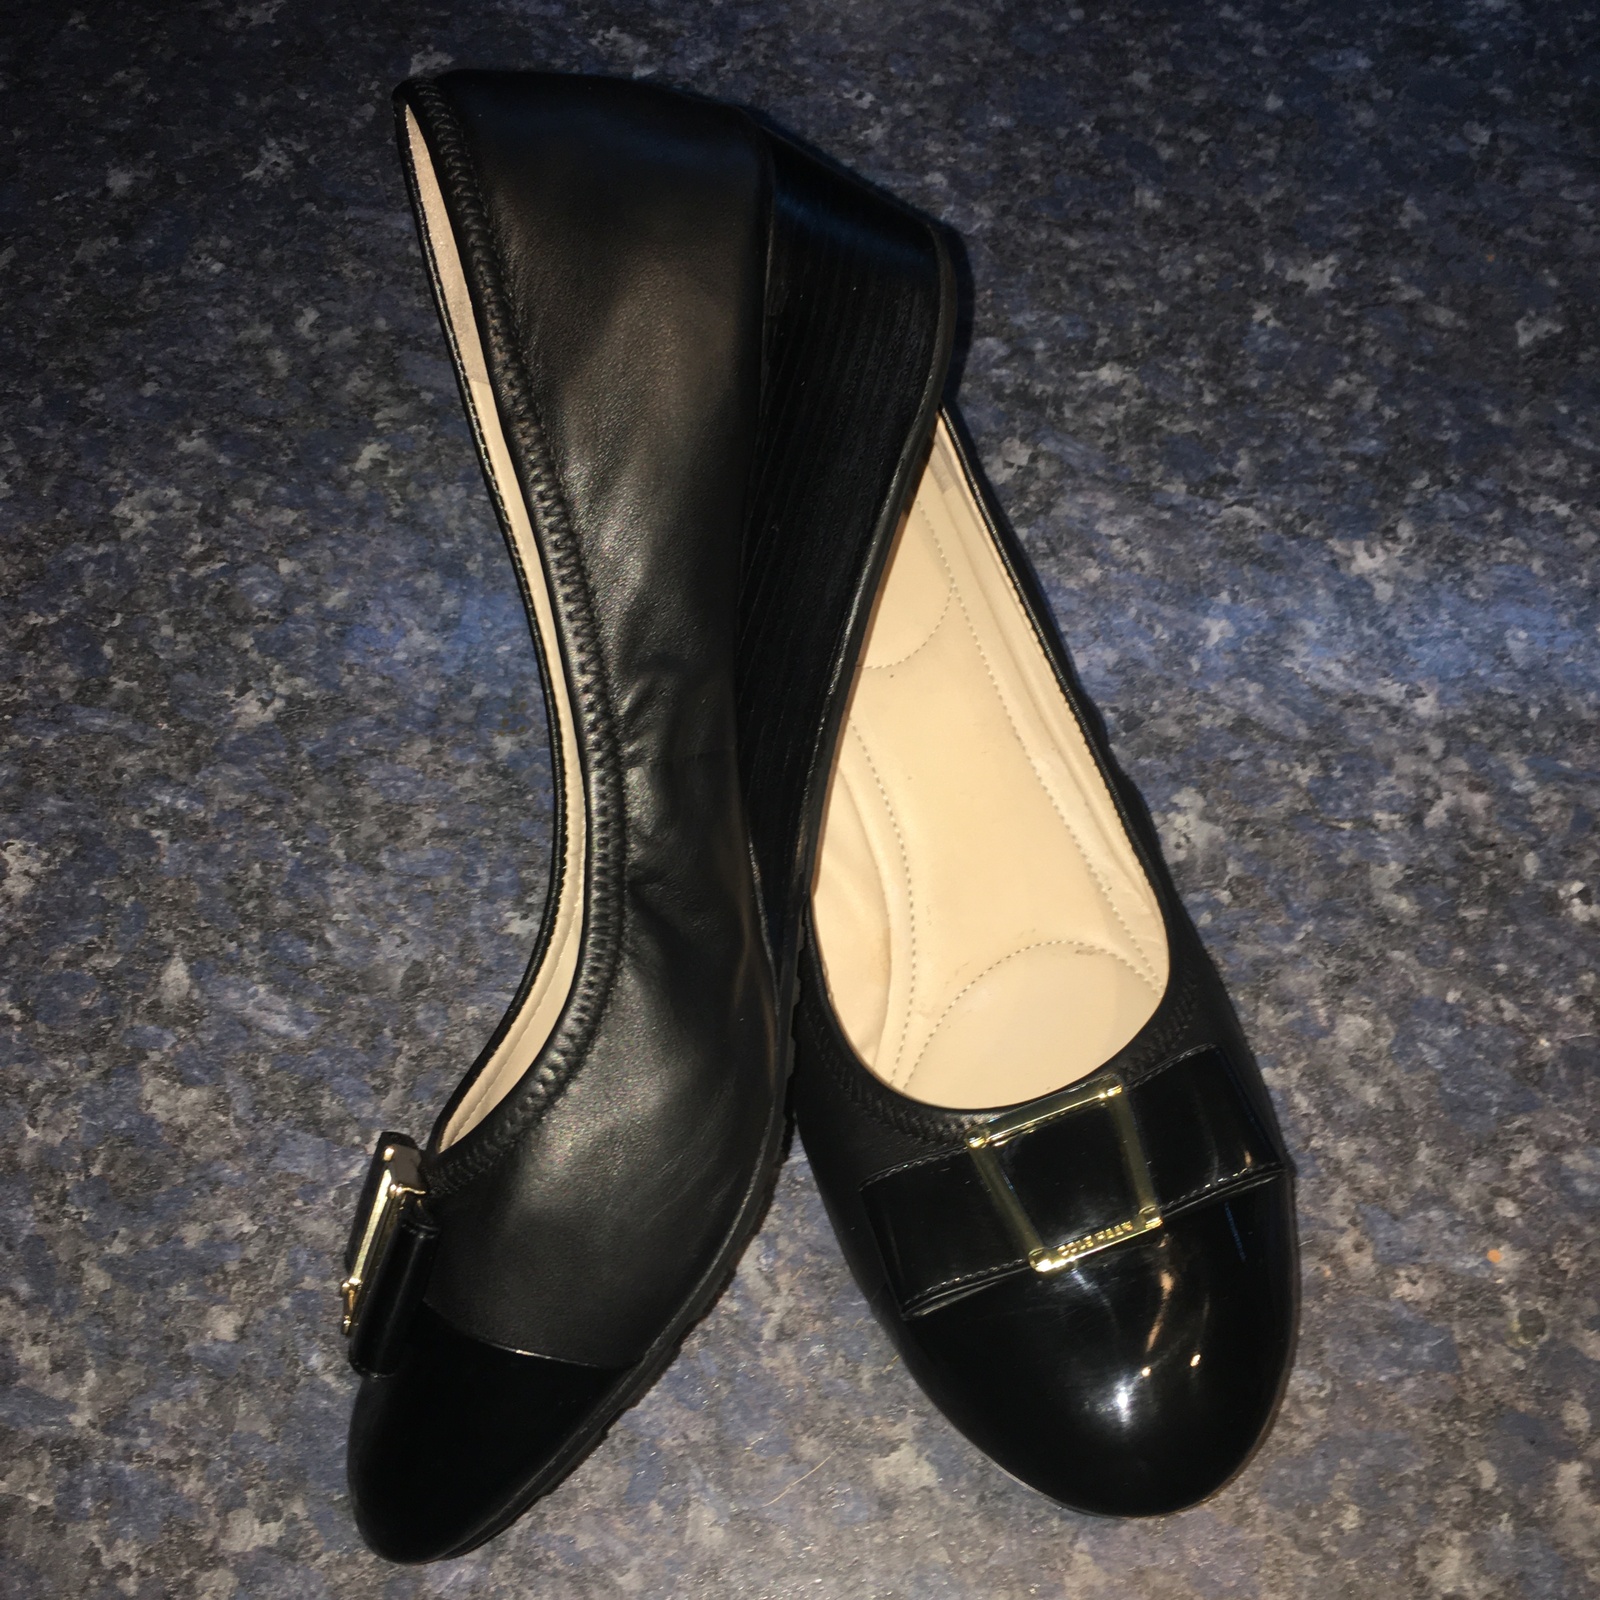 Cole Haan Black Leather EMORY BOW WEDGE Style #W09950, Women Size 9.5b ...